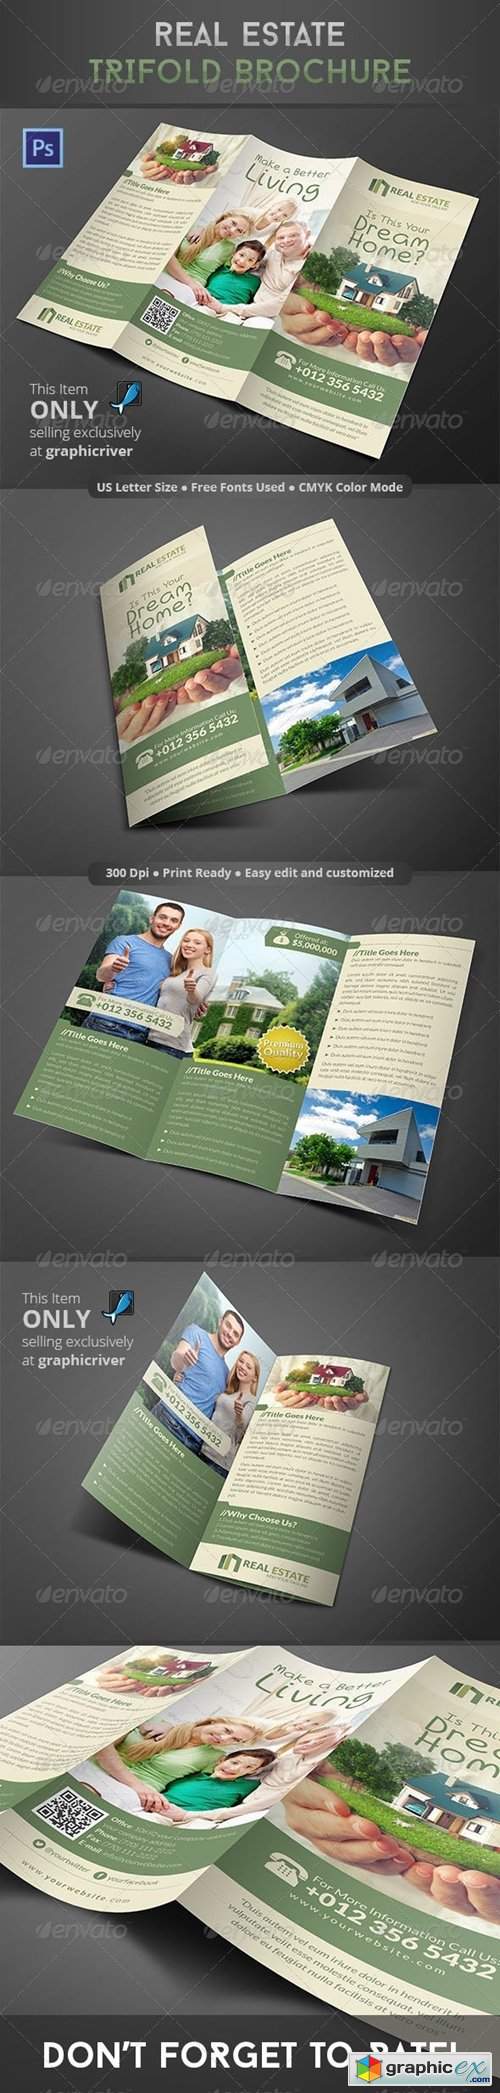 Real Estate Trifold Brochure 8606749